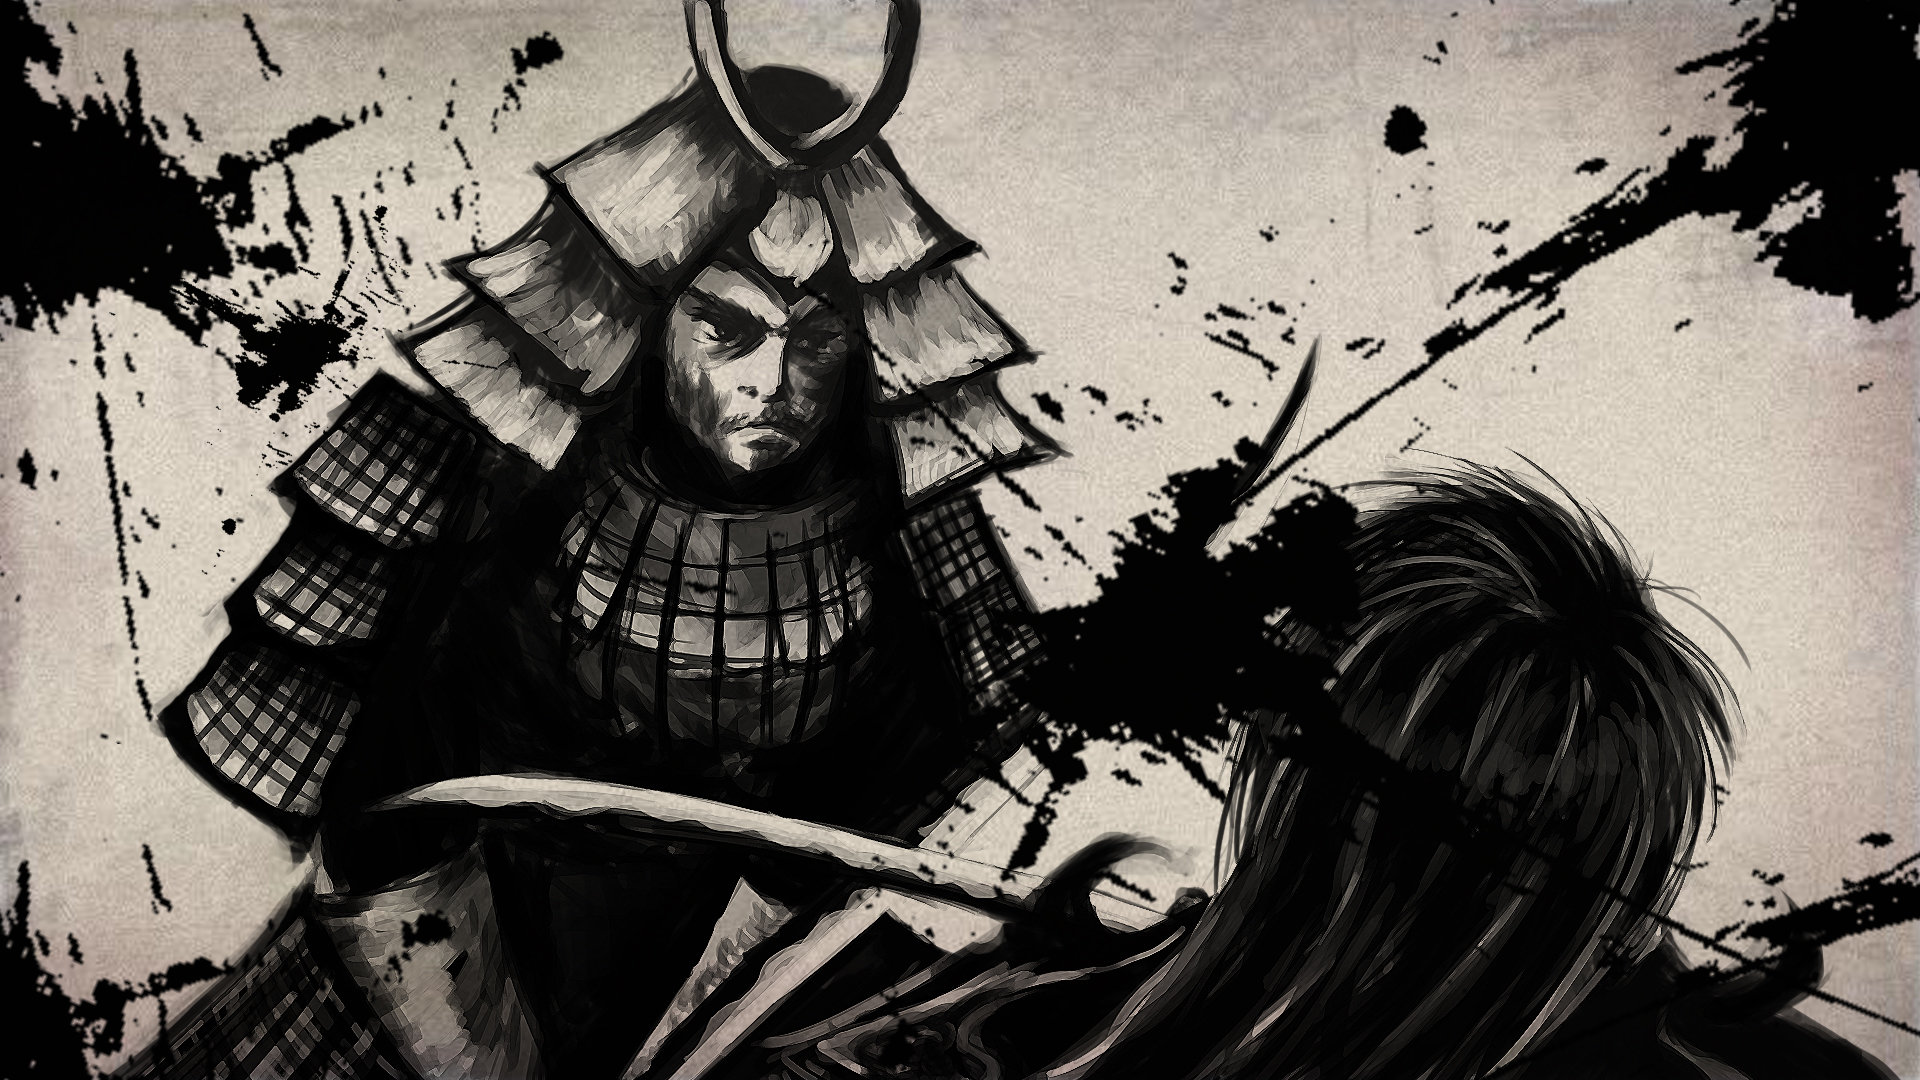 Download 1080p Samurai PC background ID:45550 for free